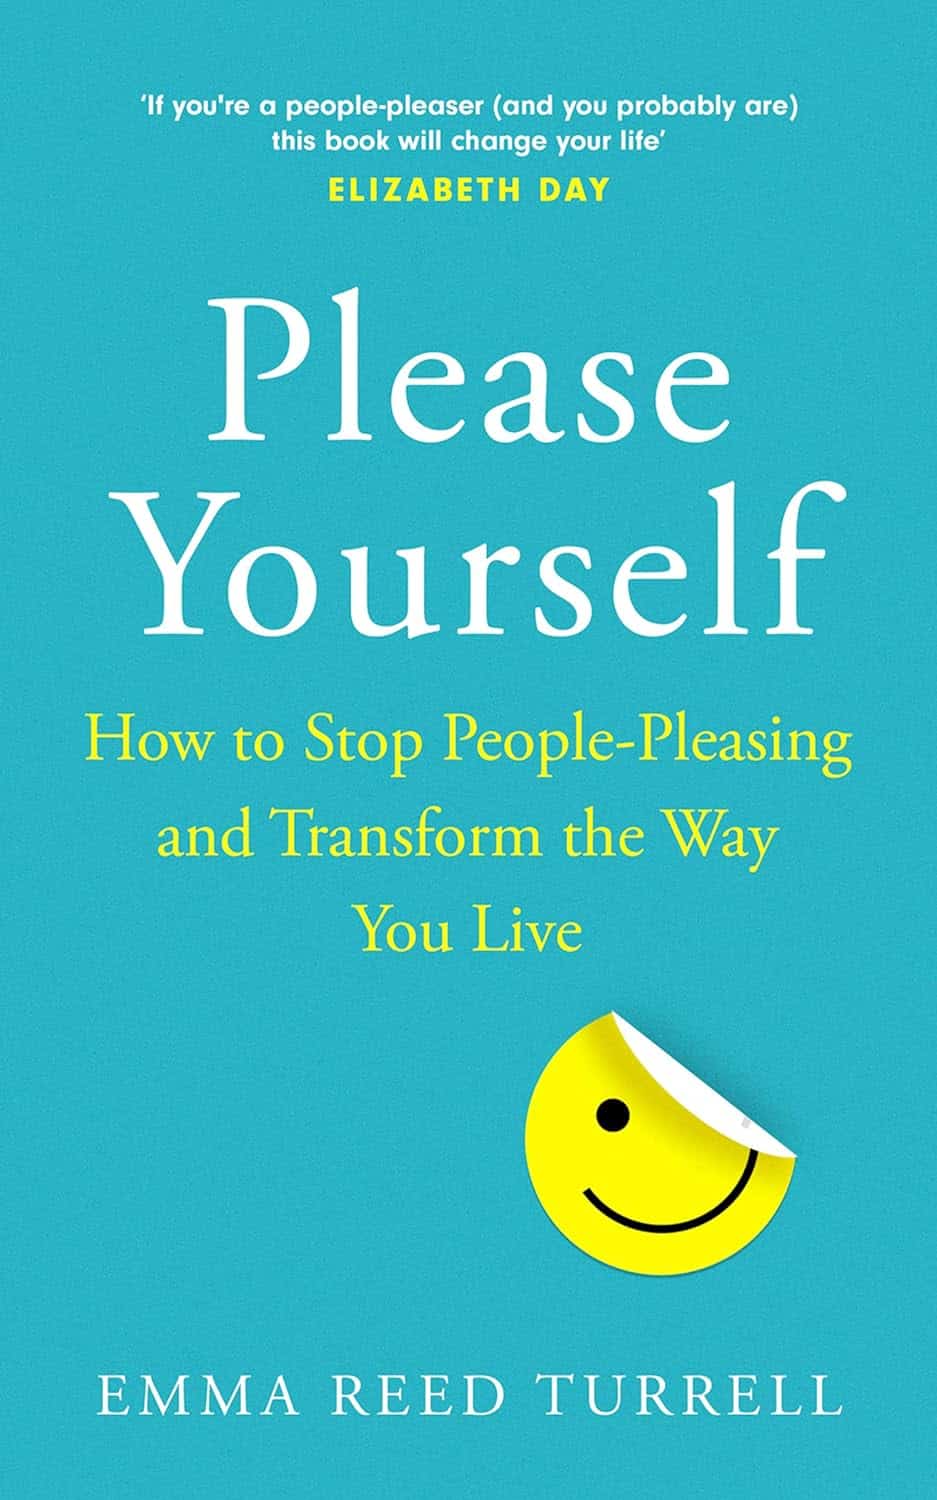 Please Yourself How to Stop People-Pleasing and Transform the Way You Live